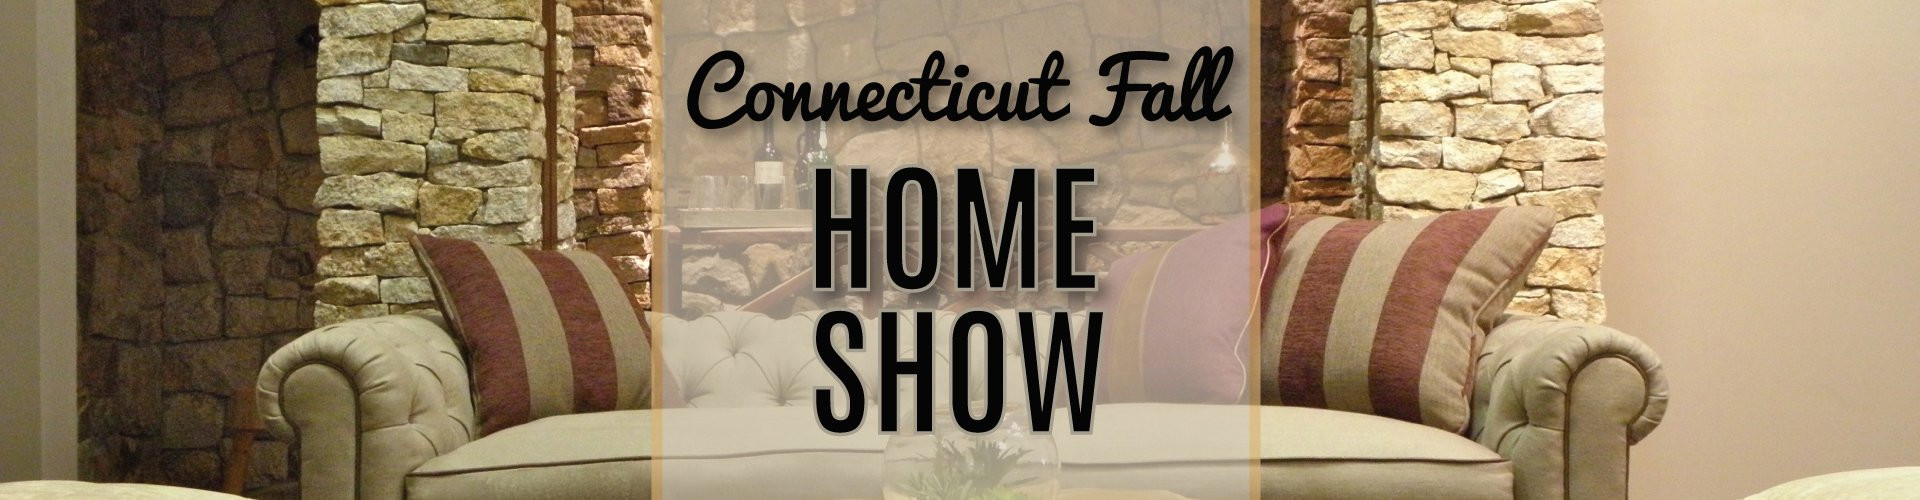 17 Stylish Hardwood Floor Refinishing East Hartford Ct 2023 free download hardwood floor refinishing east hartford ct of fall ct home show 2018 connecticut home expo jenks productions for ctfallhometopper